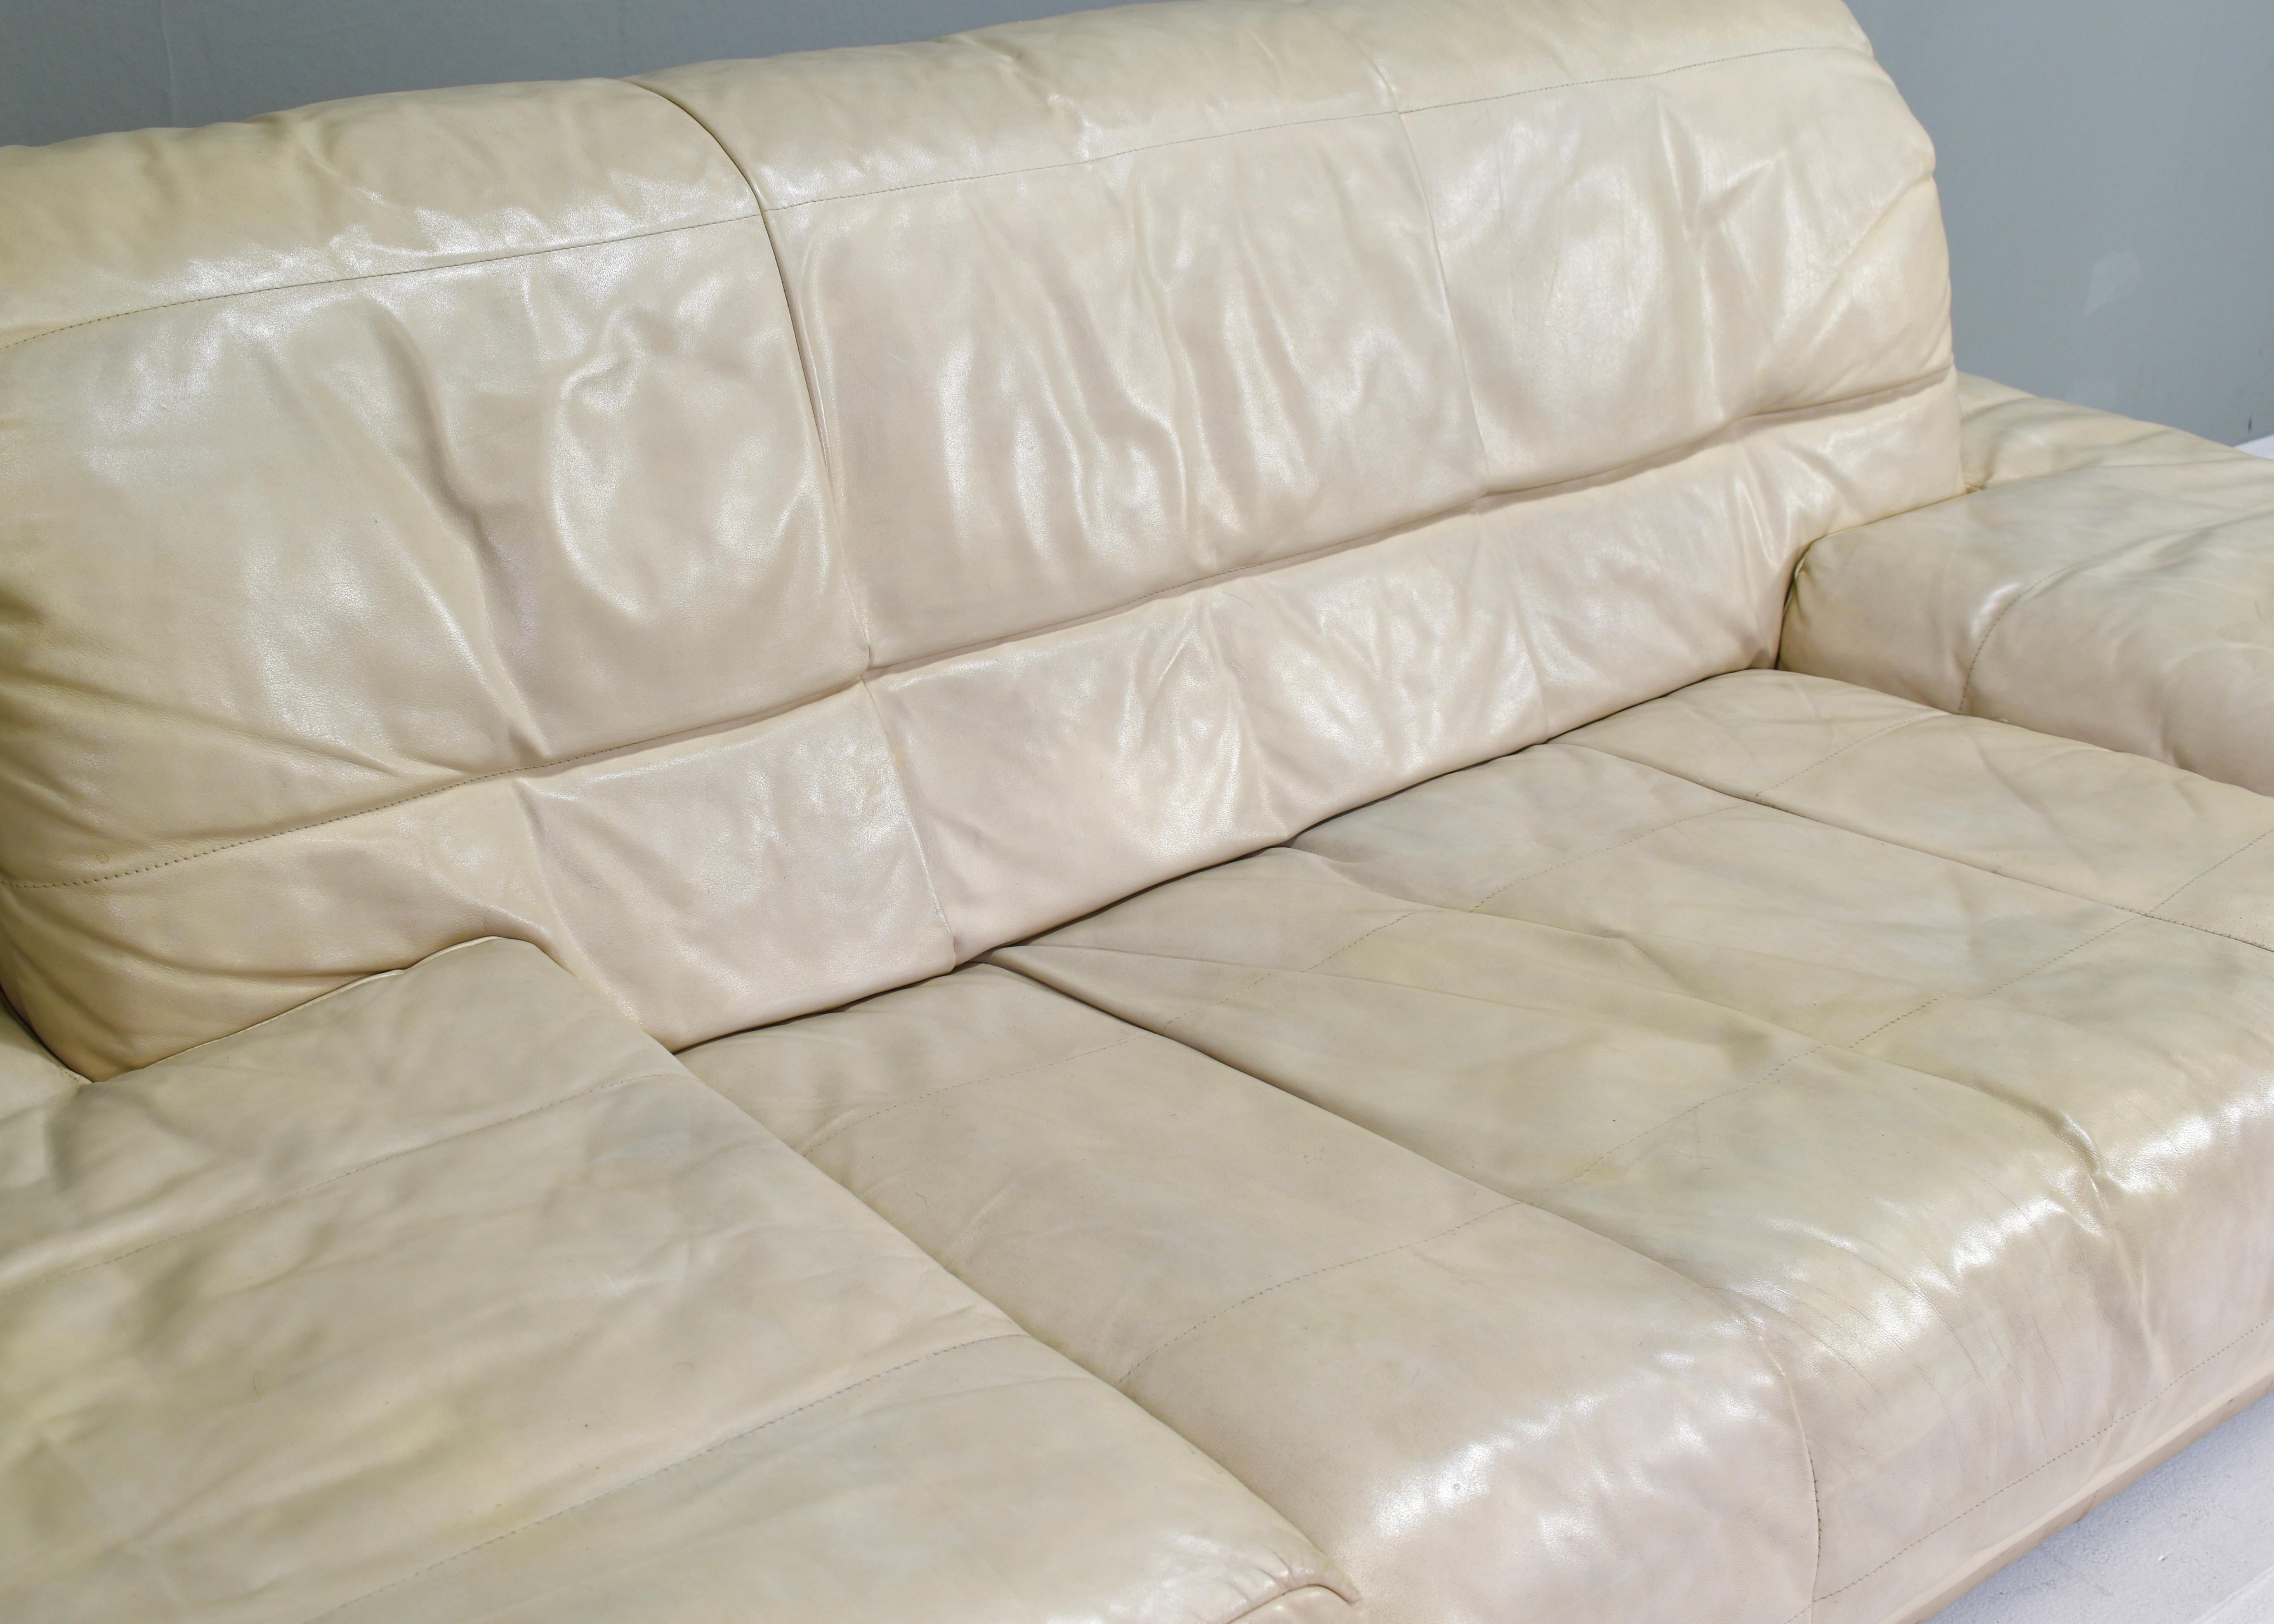 Rolf Benz 2-seat sofa in Ivory Cream White Leather – Germany, circa 1980-1990 For Sale 9